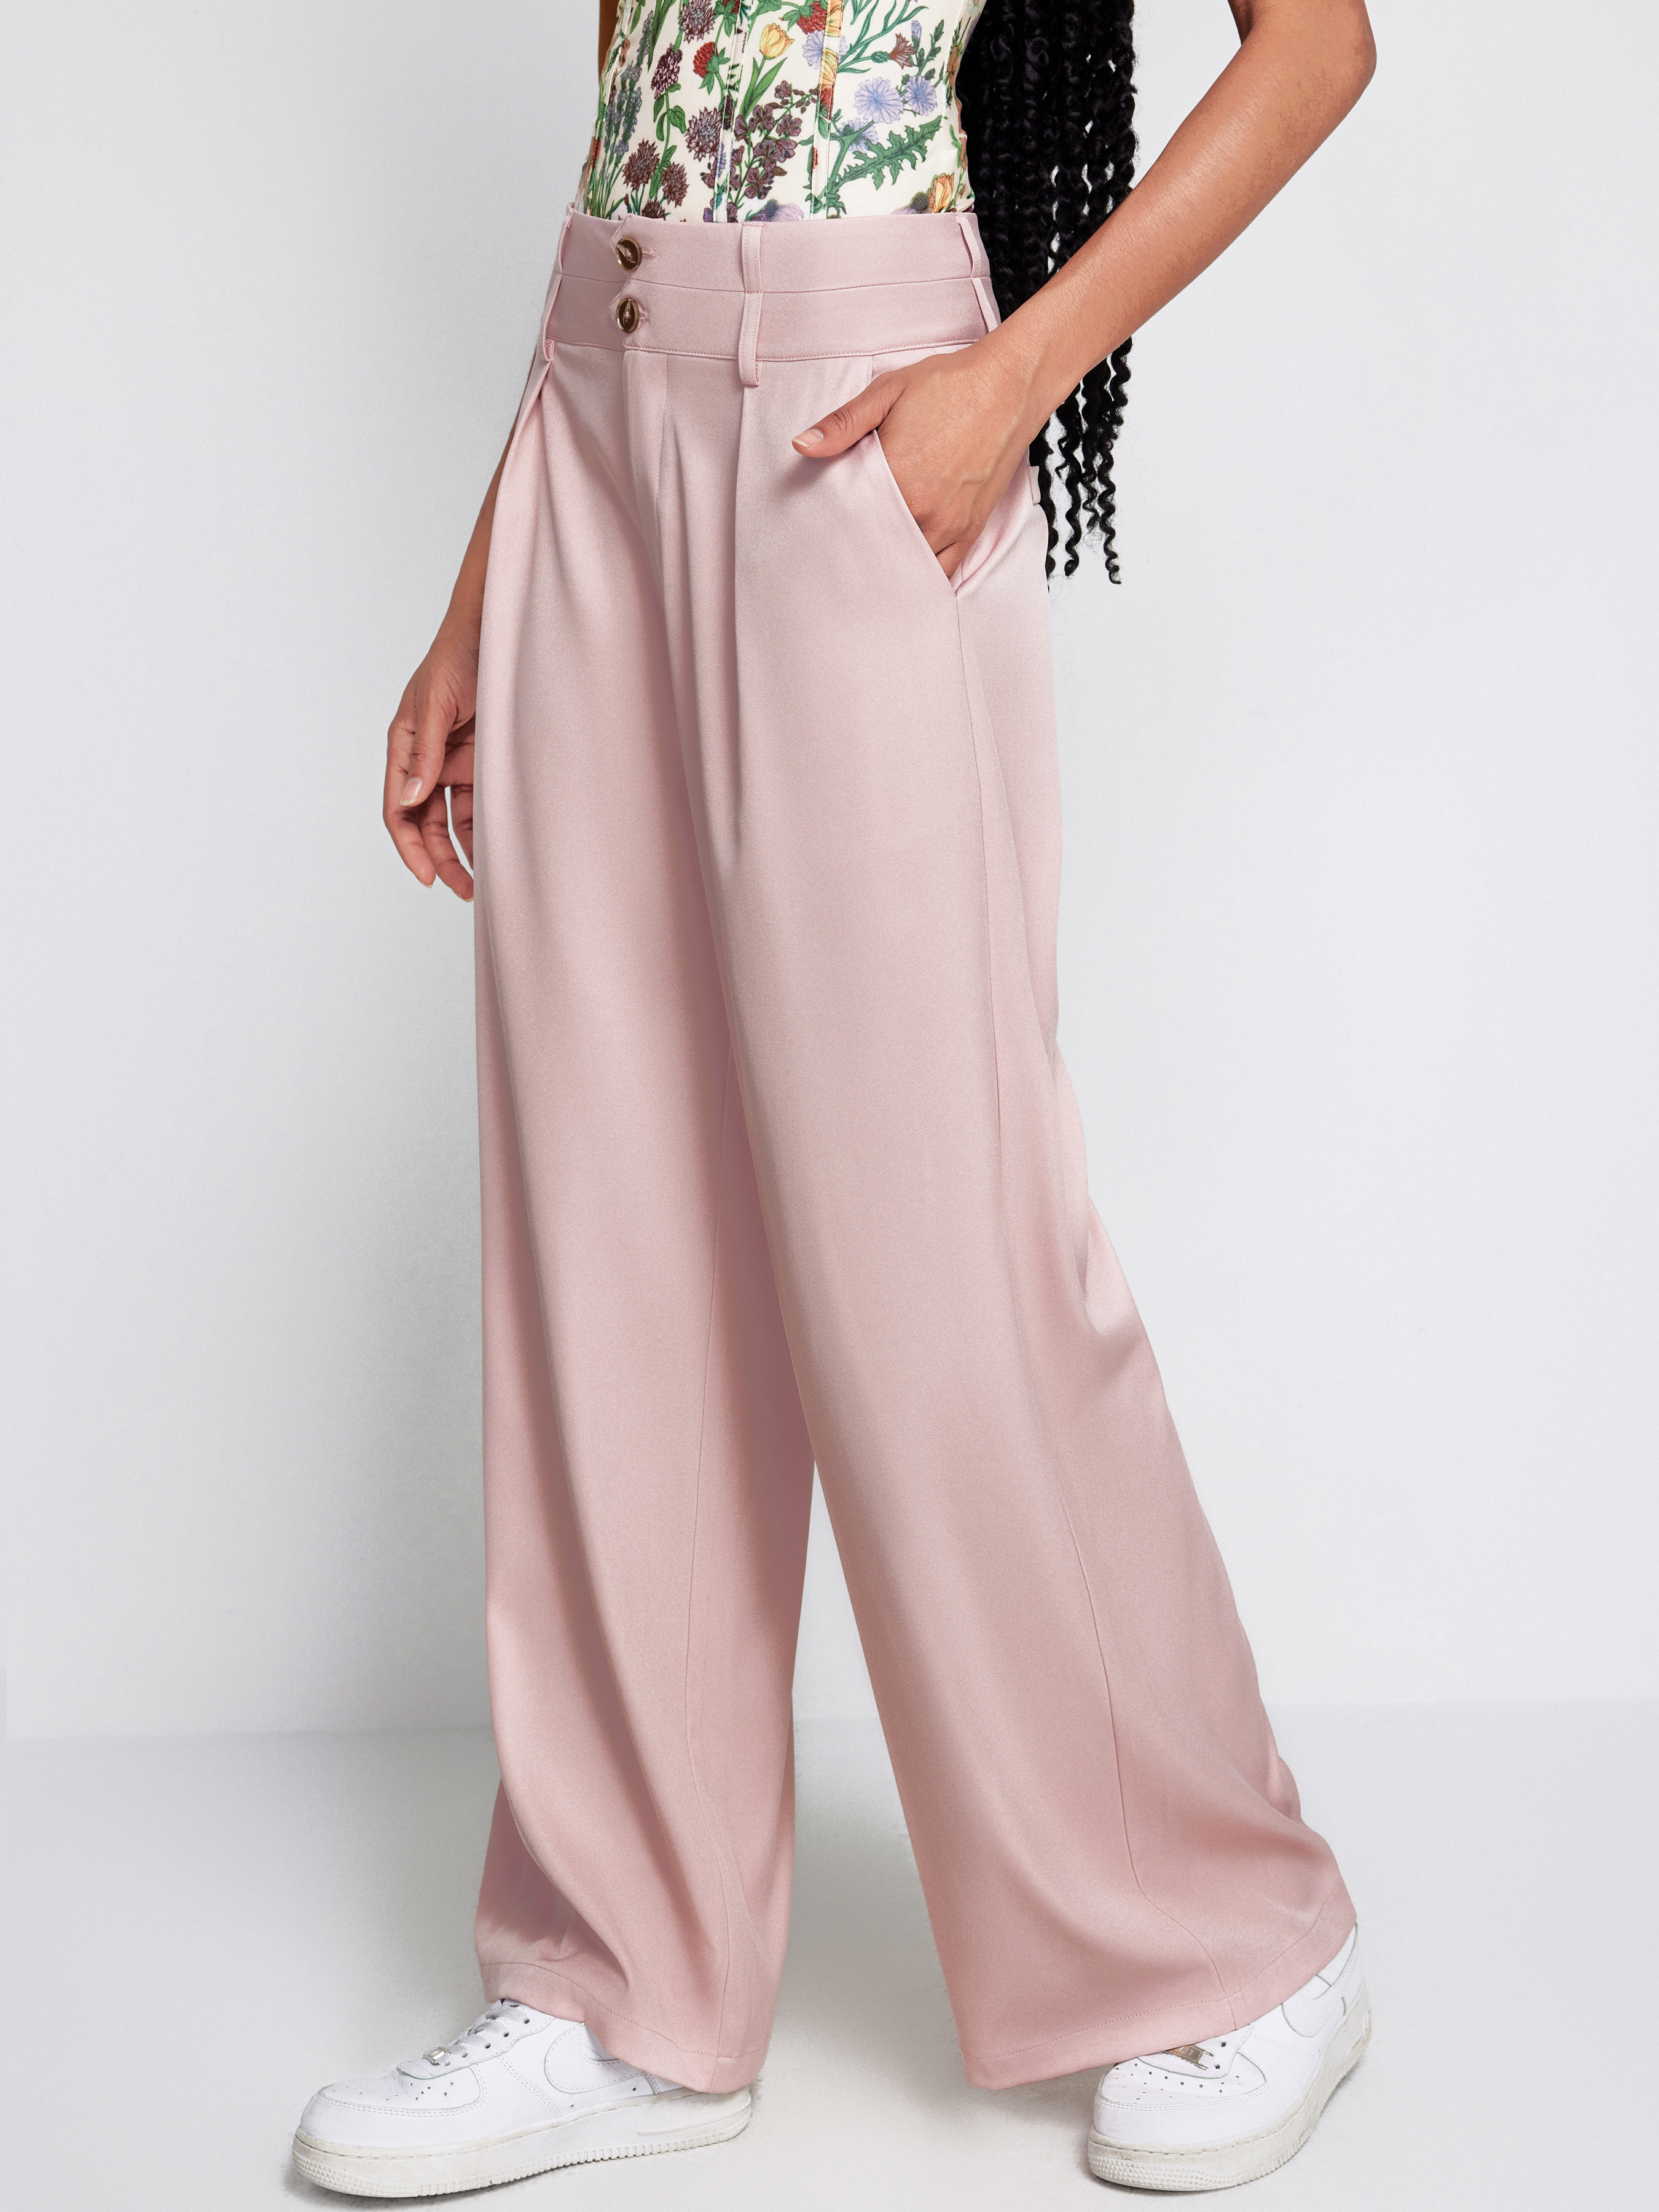 Neon Pink Cigarette Trousers from River Island on 21 Buttons